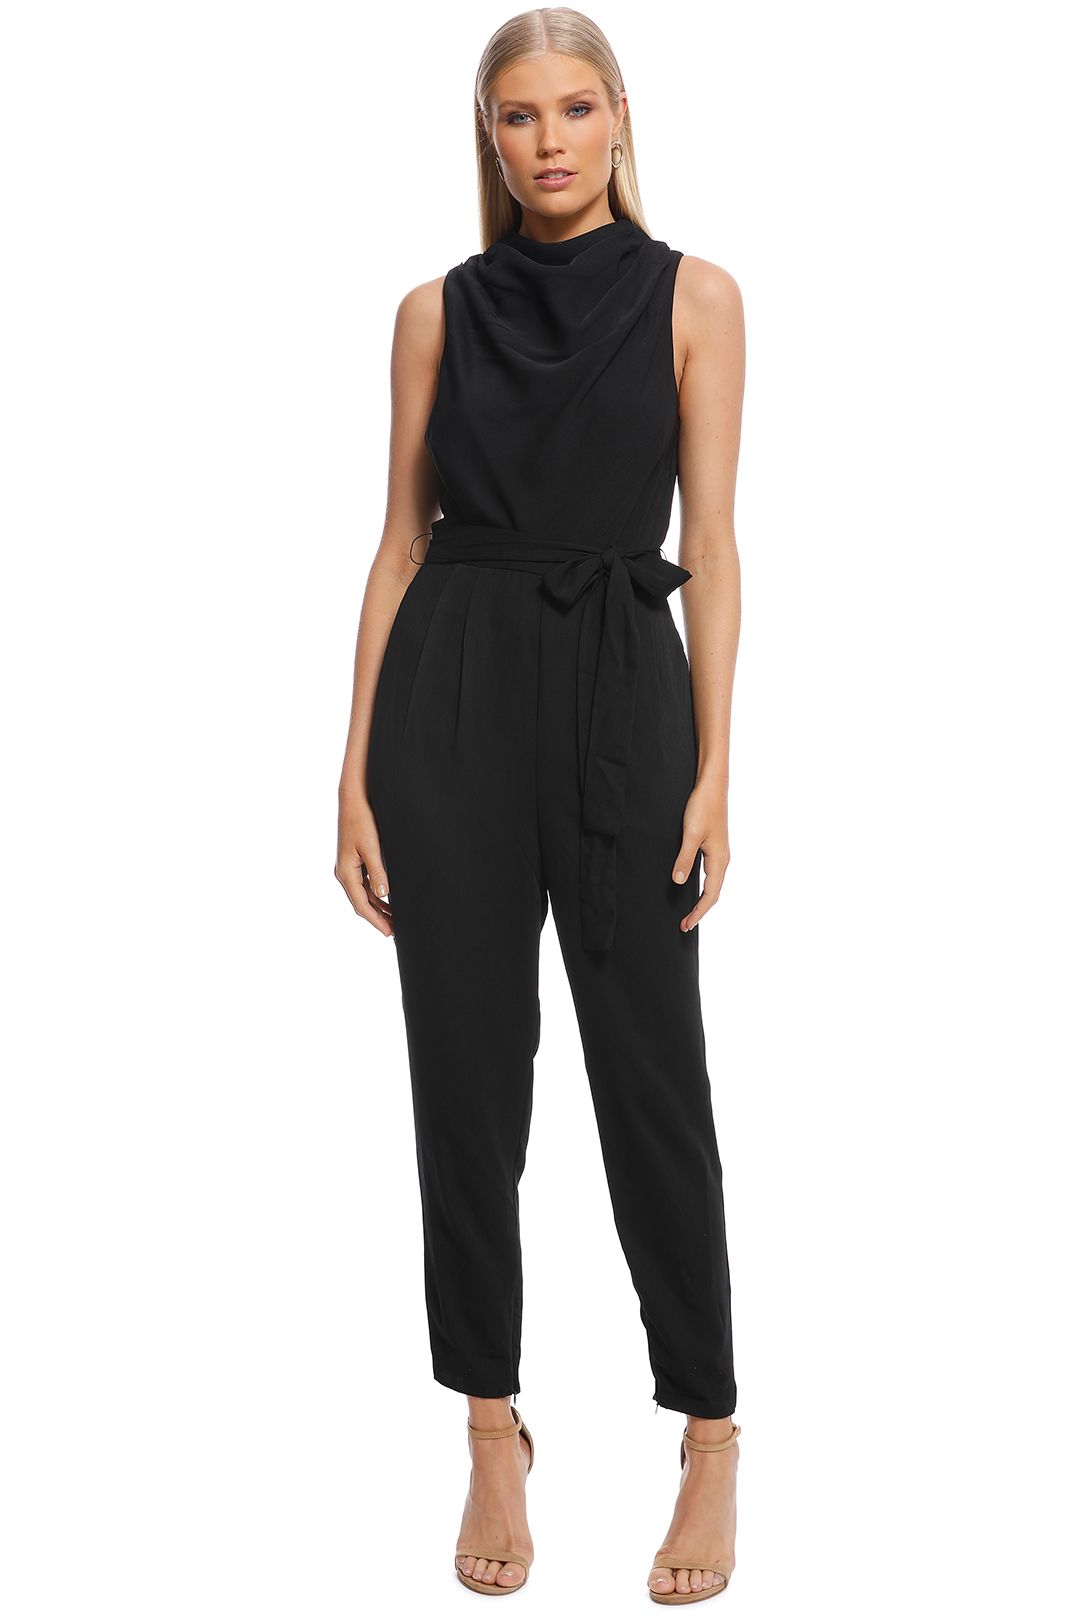 Allure Jumpsuit in Black by Keepsake the Label for Rent